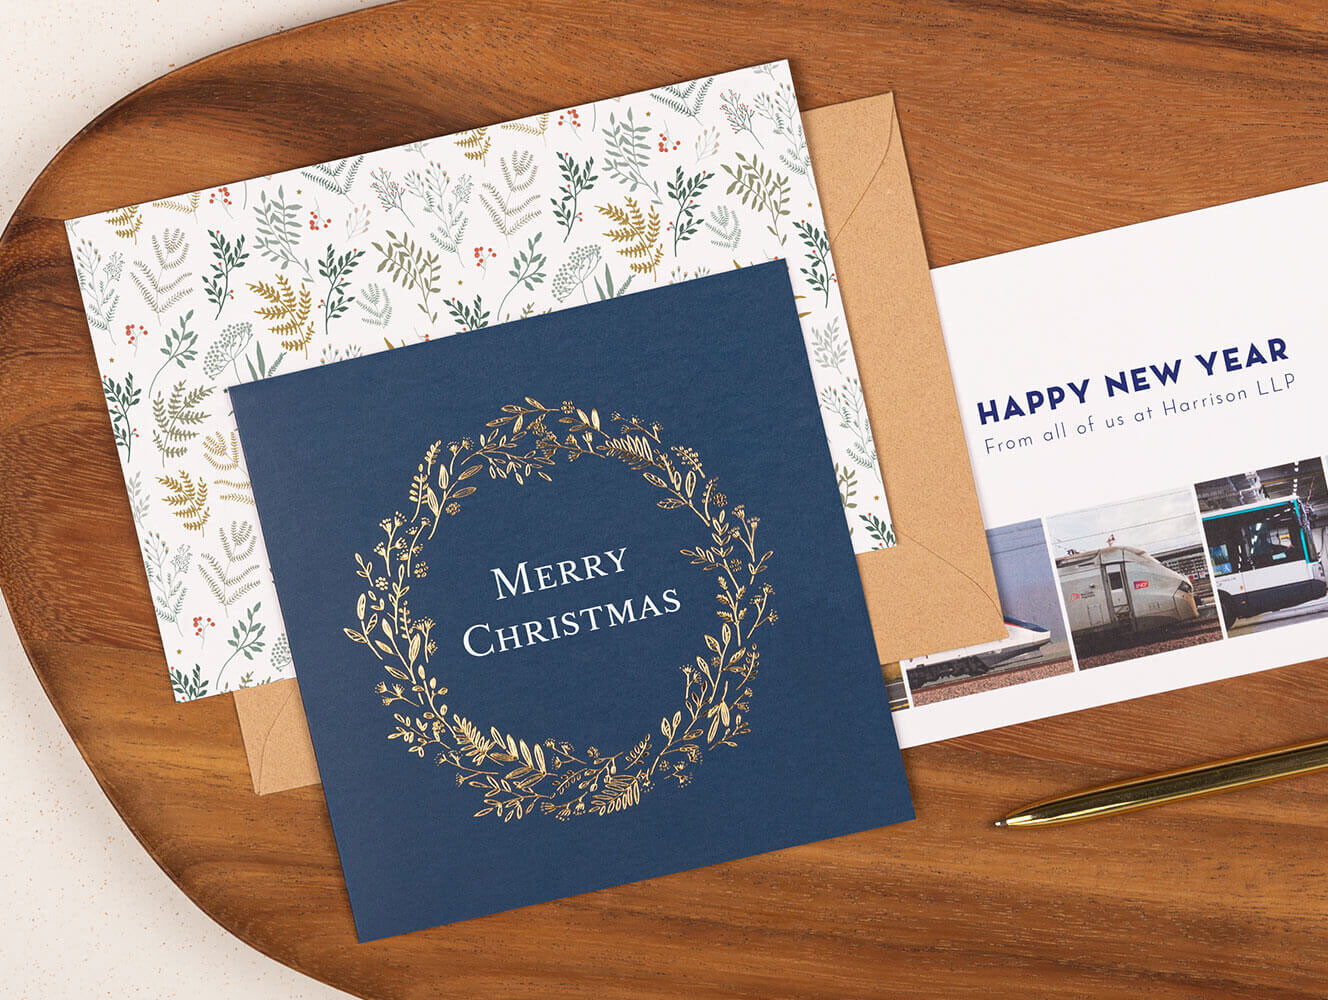 Business Christmas Card Messages 